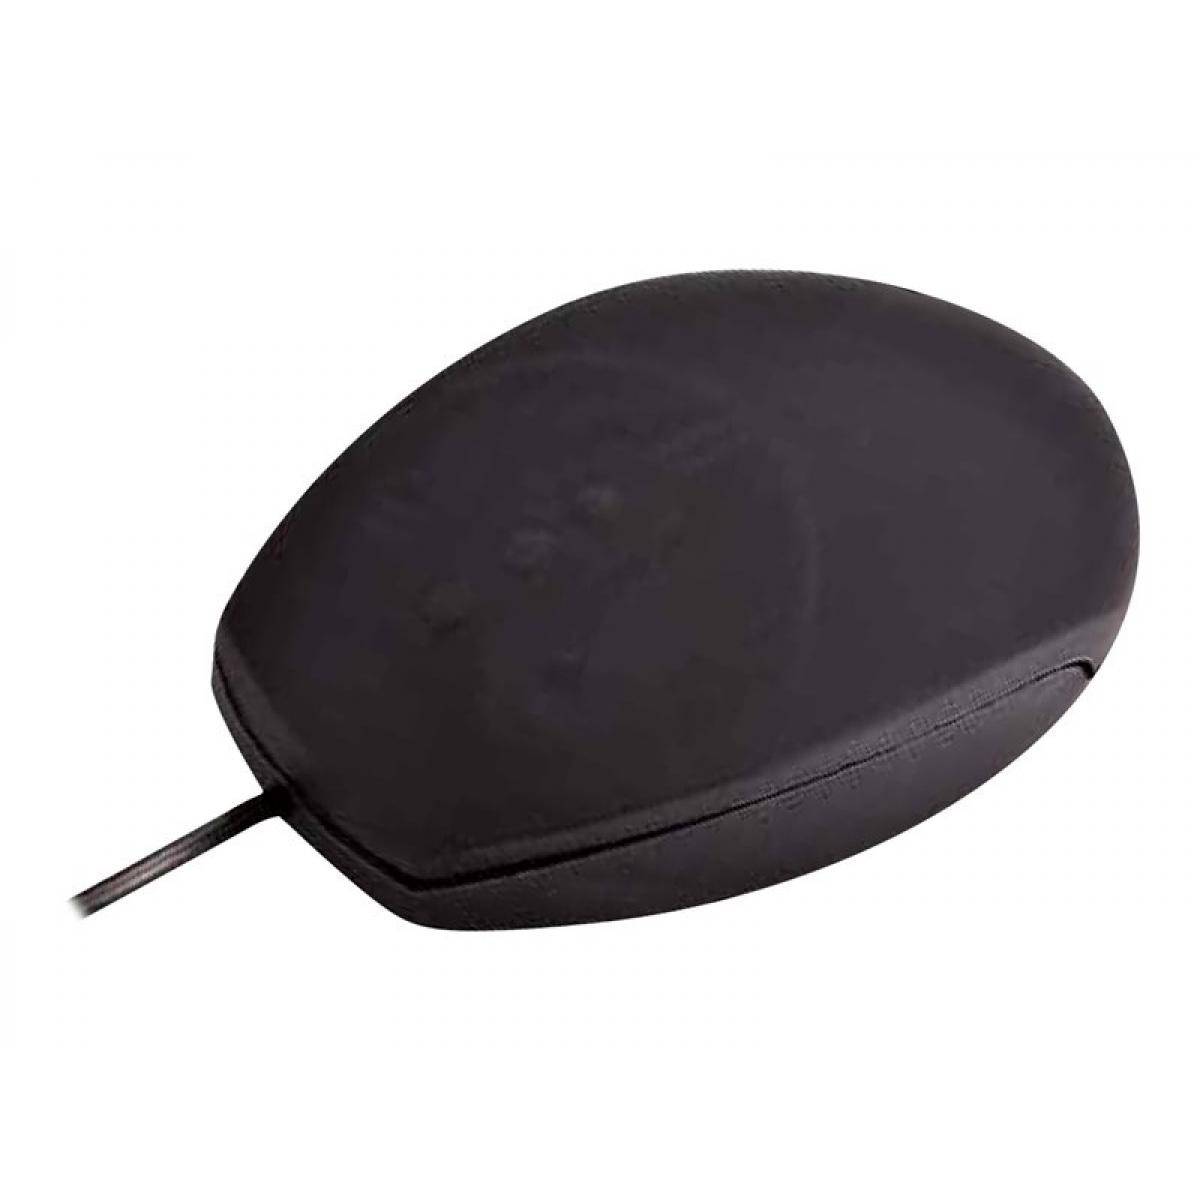 Mcl - MCL OPTICAL SILICONE MOUSE IP68 USB - Souris